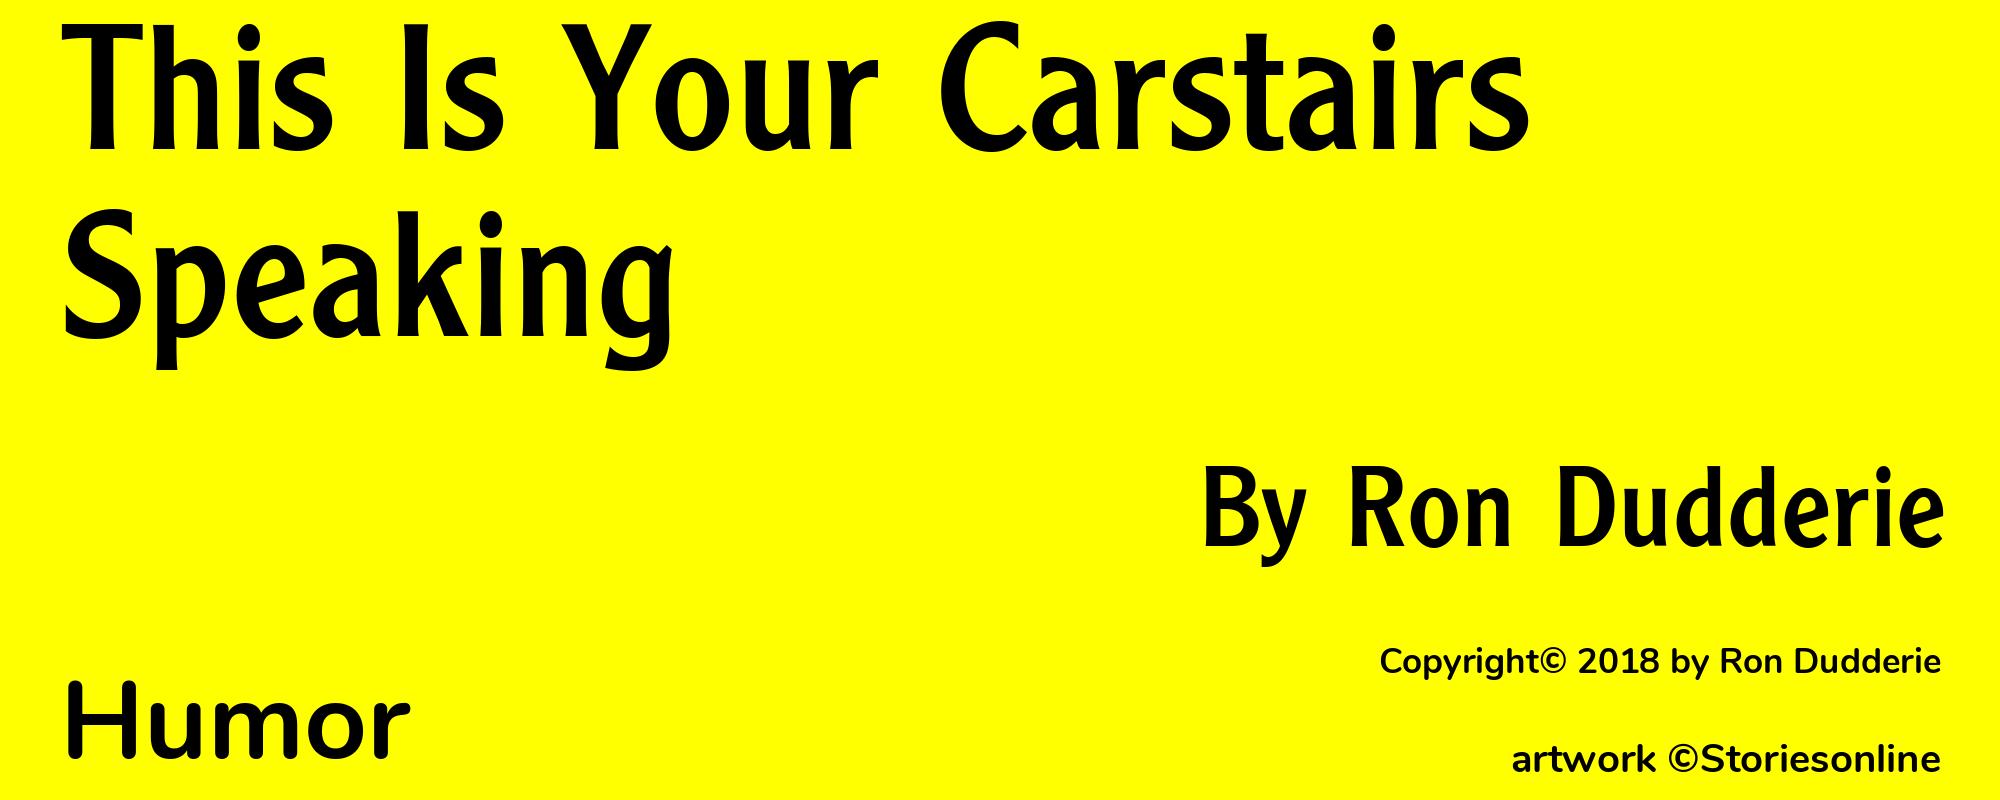 This Is Your Carstairs Speaking - Cover